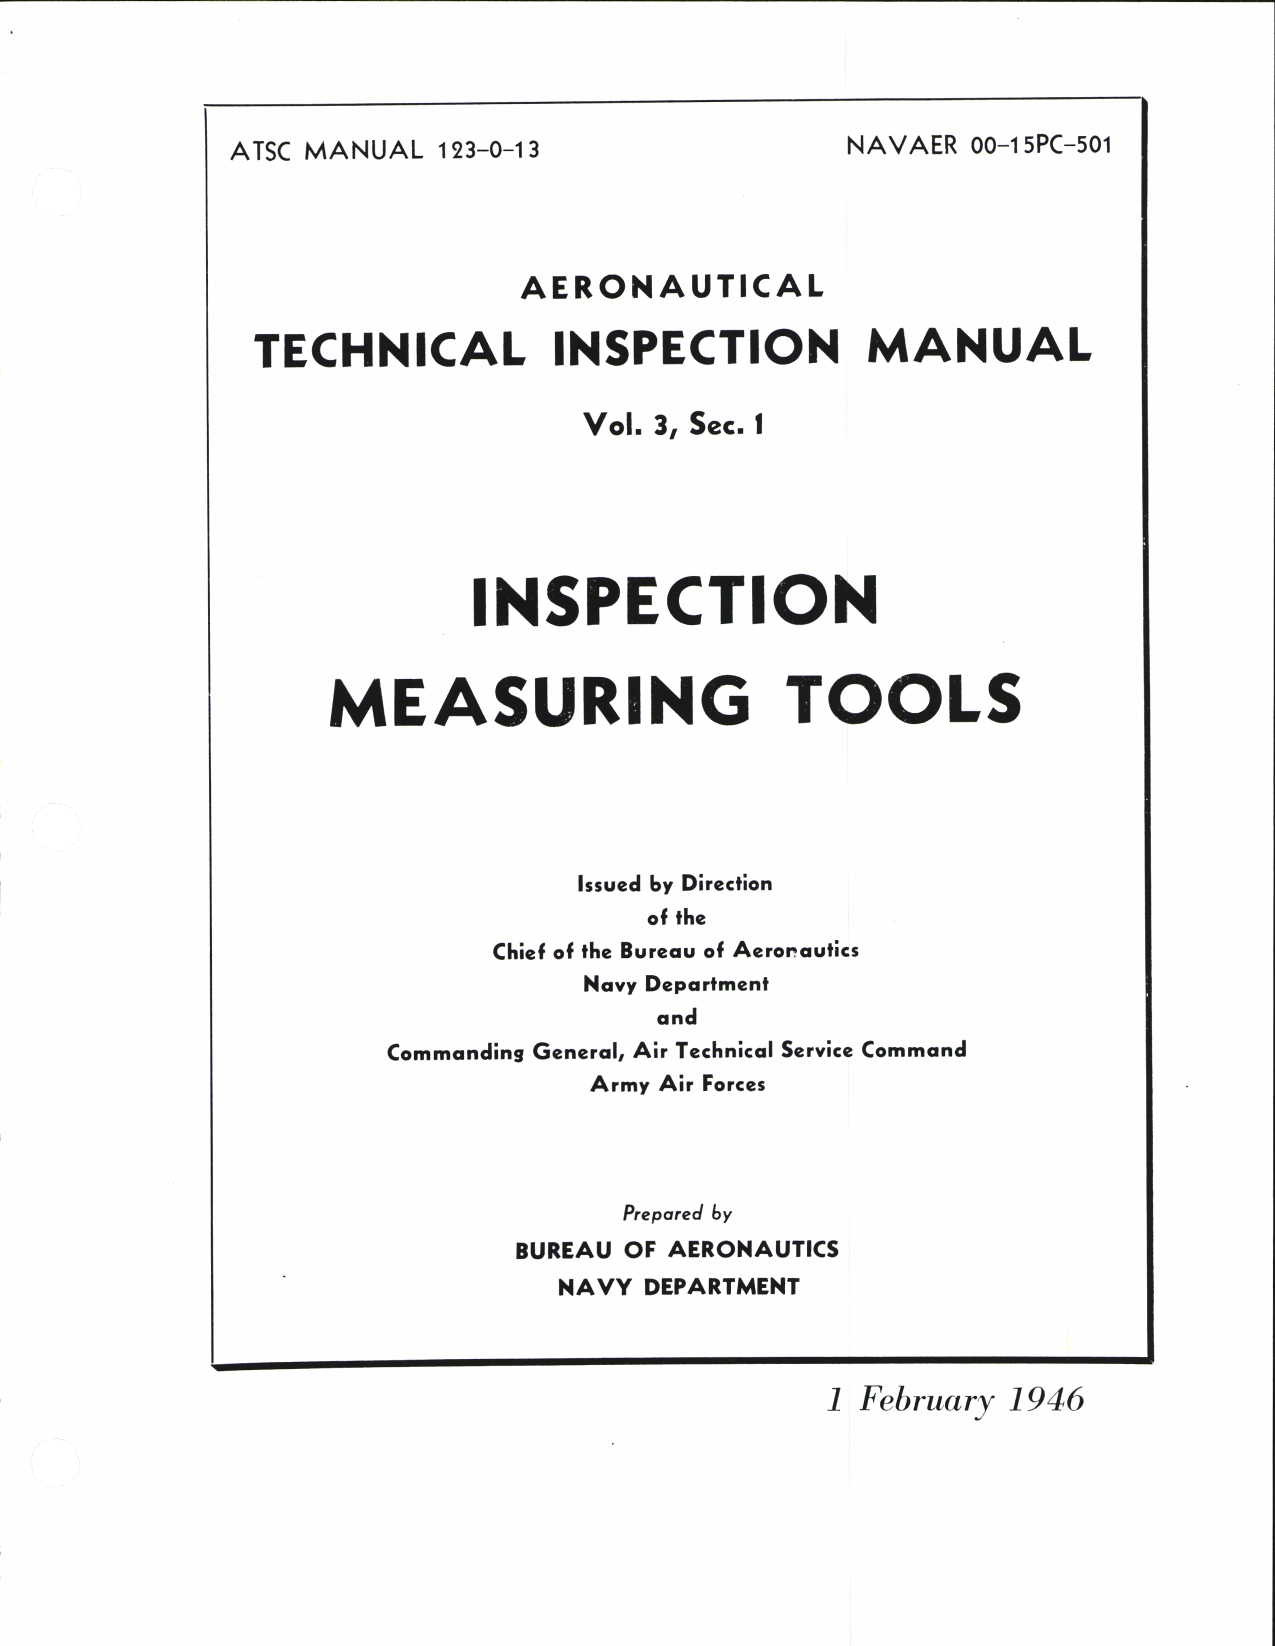 Sample page 1 from AirCorps Library document: Aeronautical Technical Inspection Manual - Inspection Measuring Tools